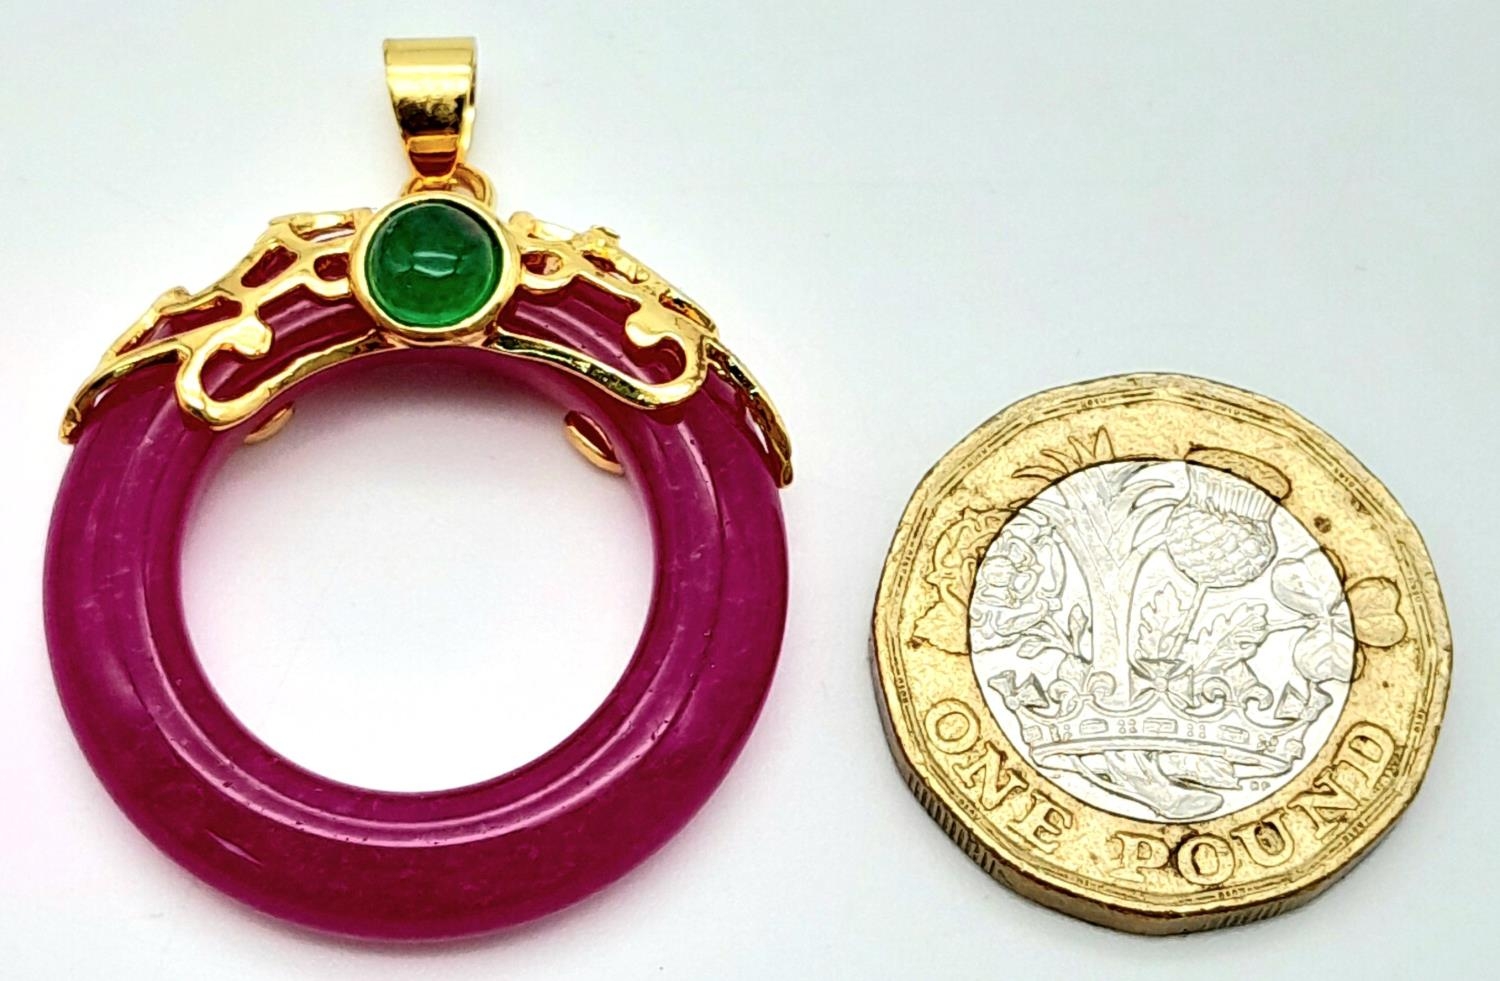 A Magenta Jade Pendant on Gilded Backing. 4cm length, 3cm diameter, 6.79g total weight. - Image 4 of 4